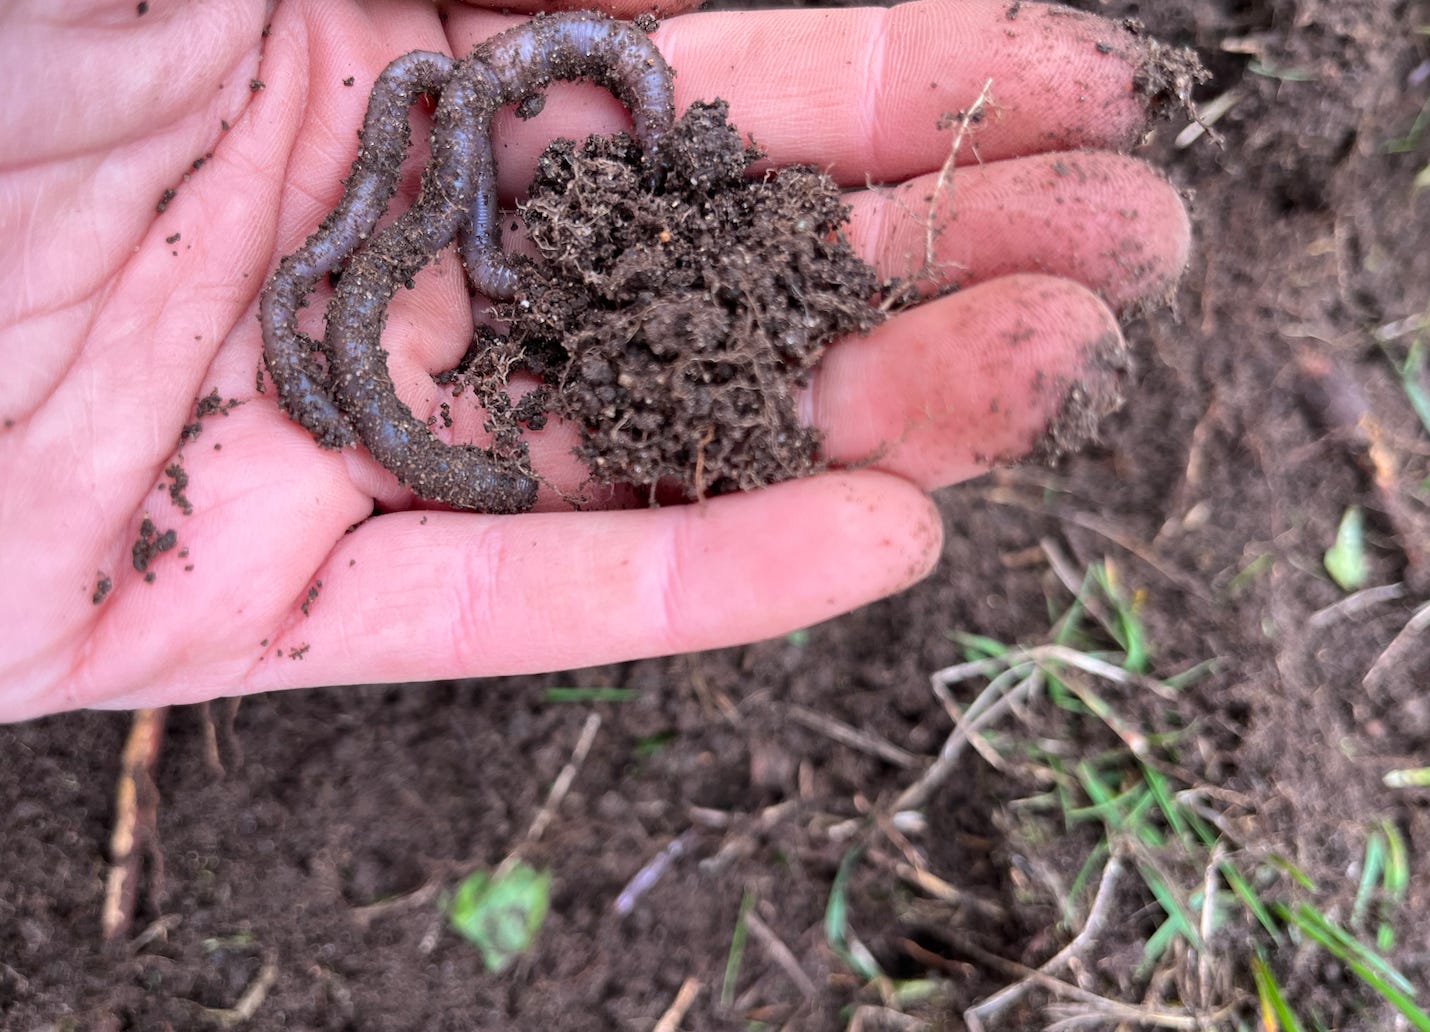 Hand holding soil and earth worms